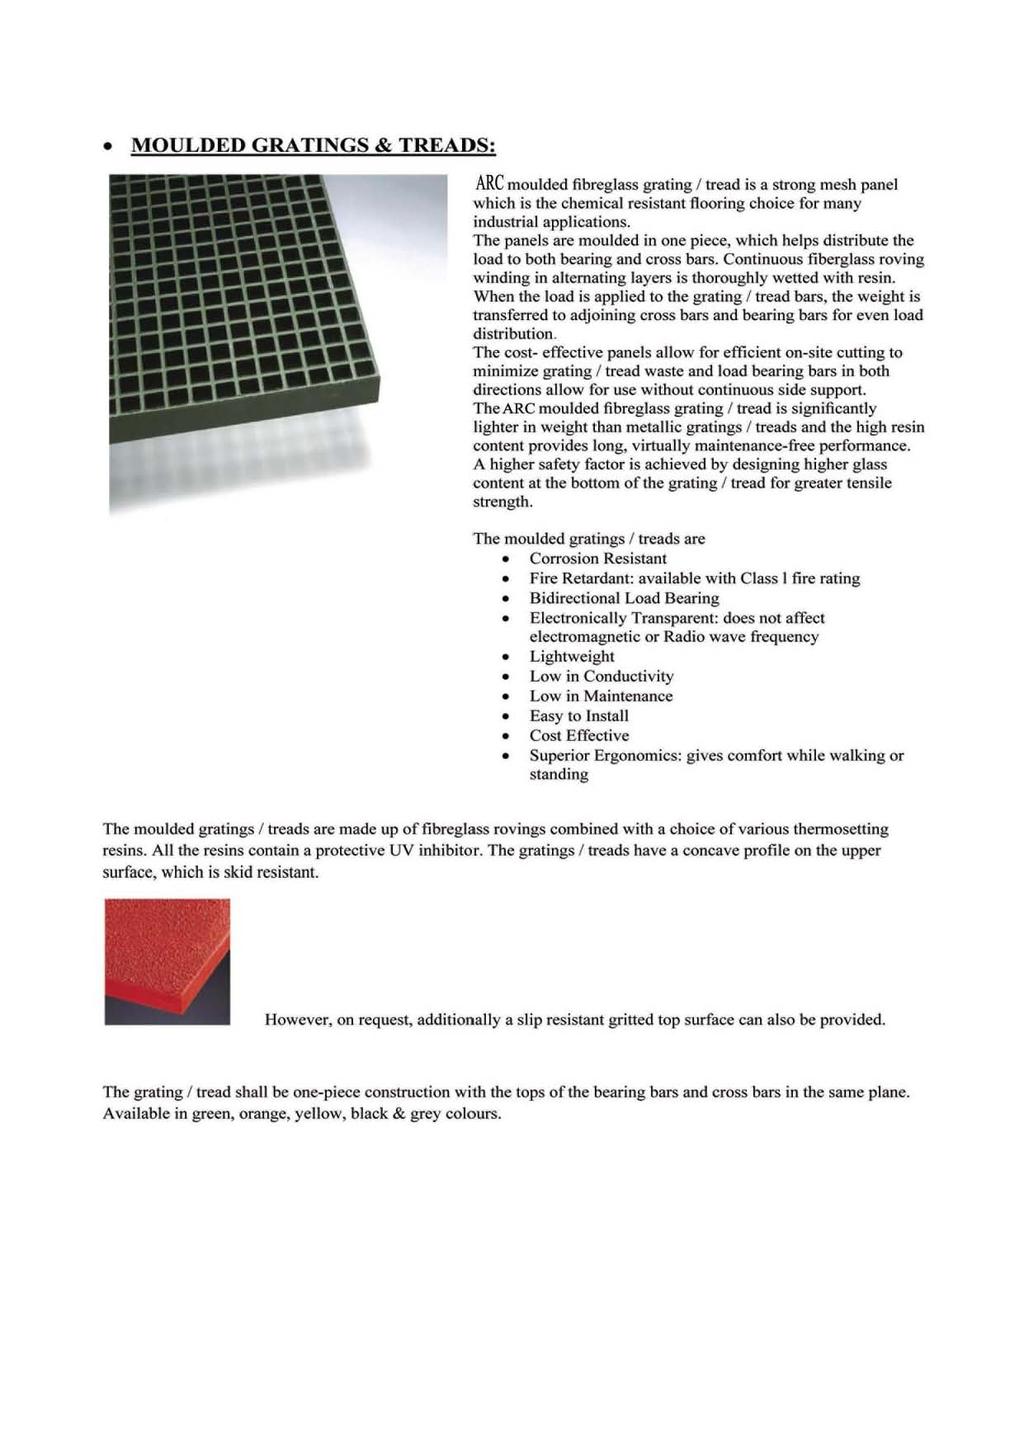 MO ULDED GRATINGS & T READS: ARC moulded fibreglass grating I tread is a siro ng mesh panel which is the chemical resistant flooring choice for many industrial applications.